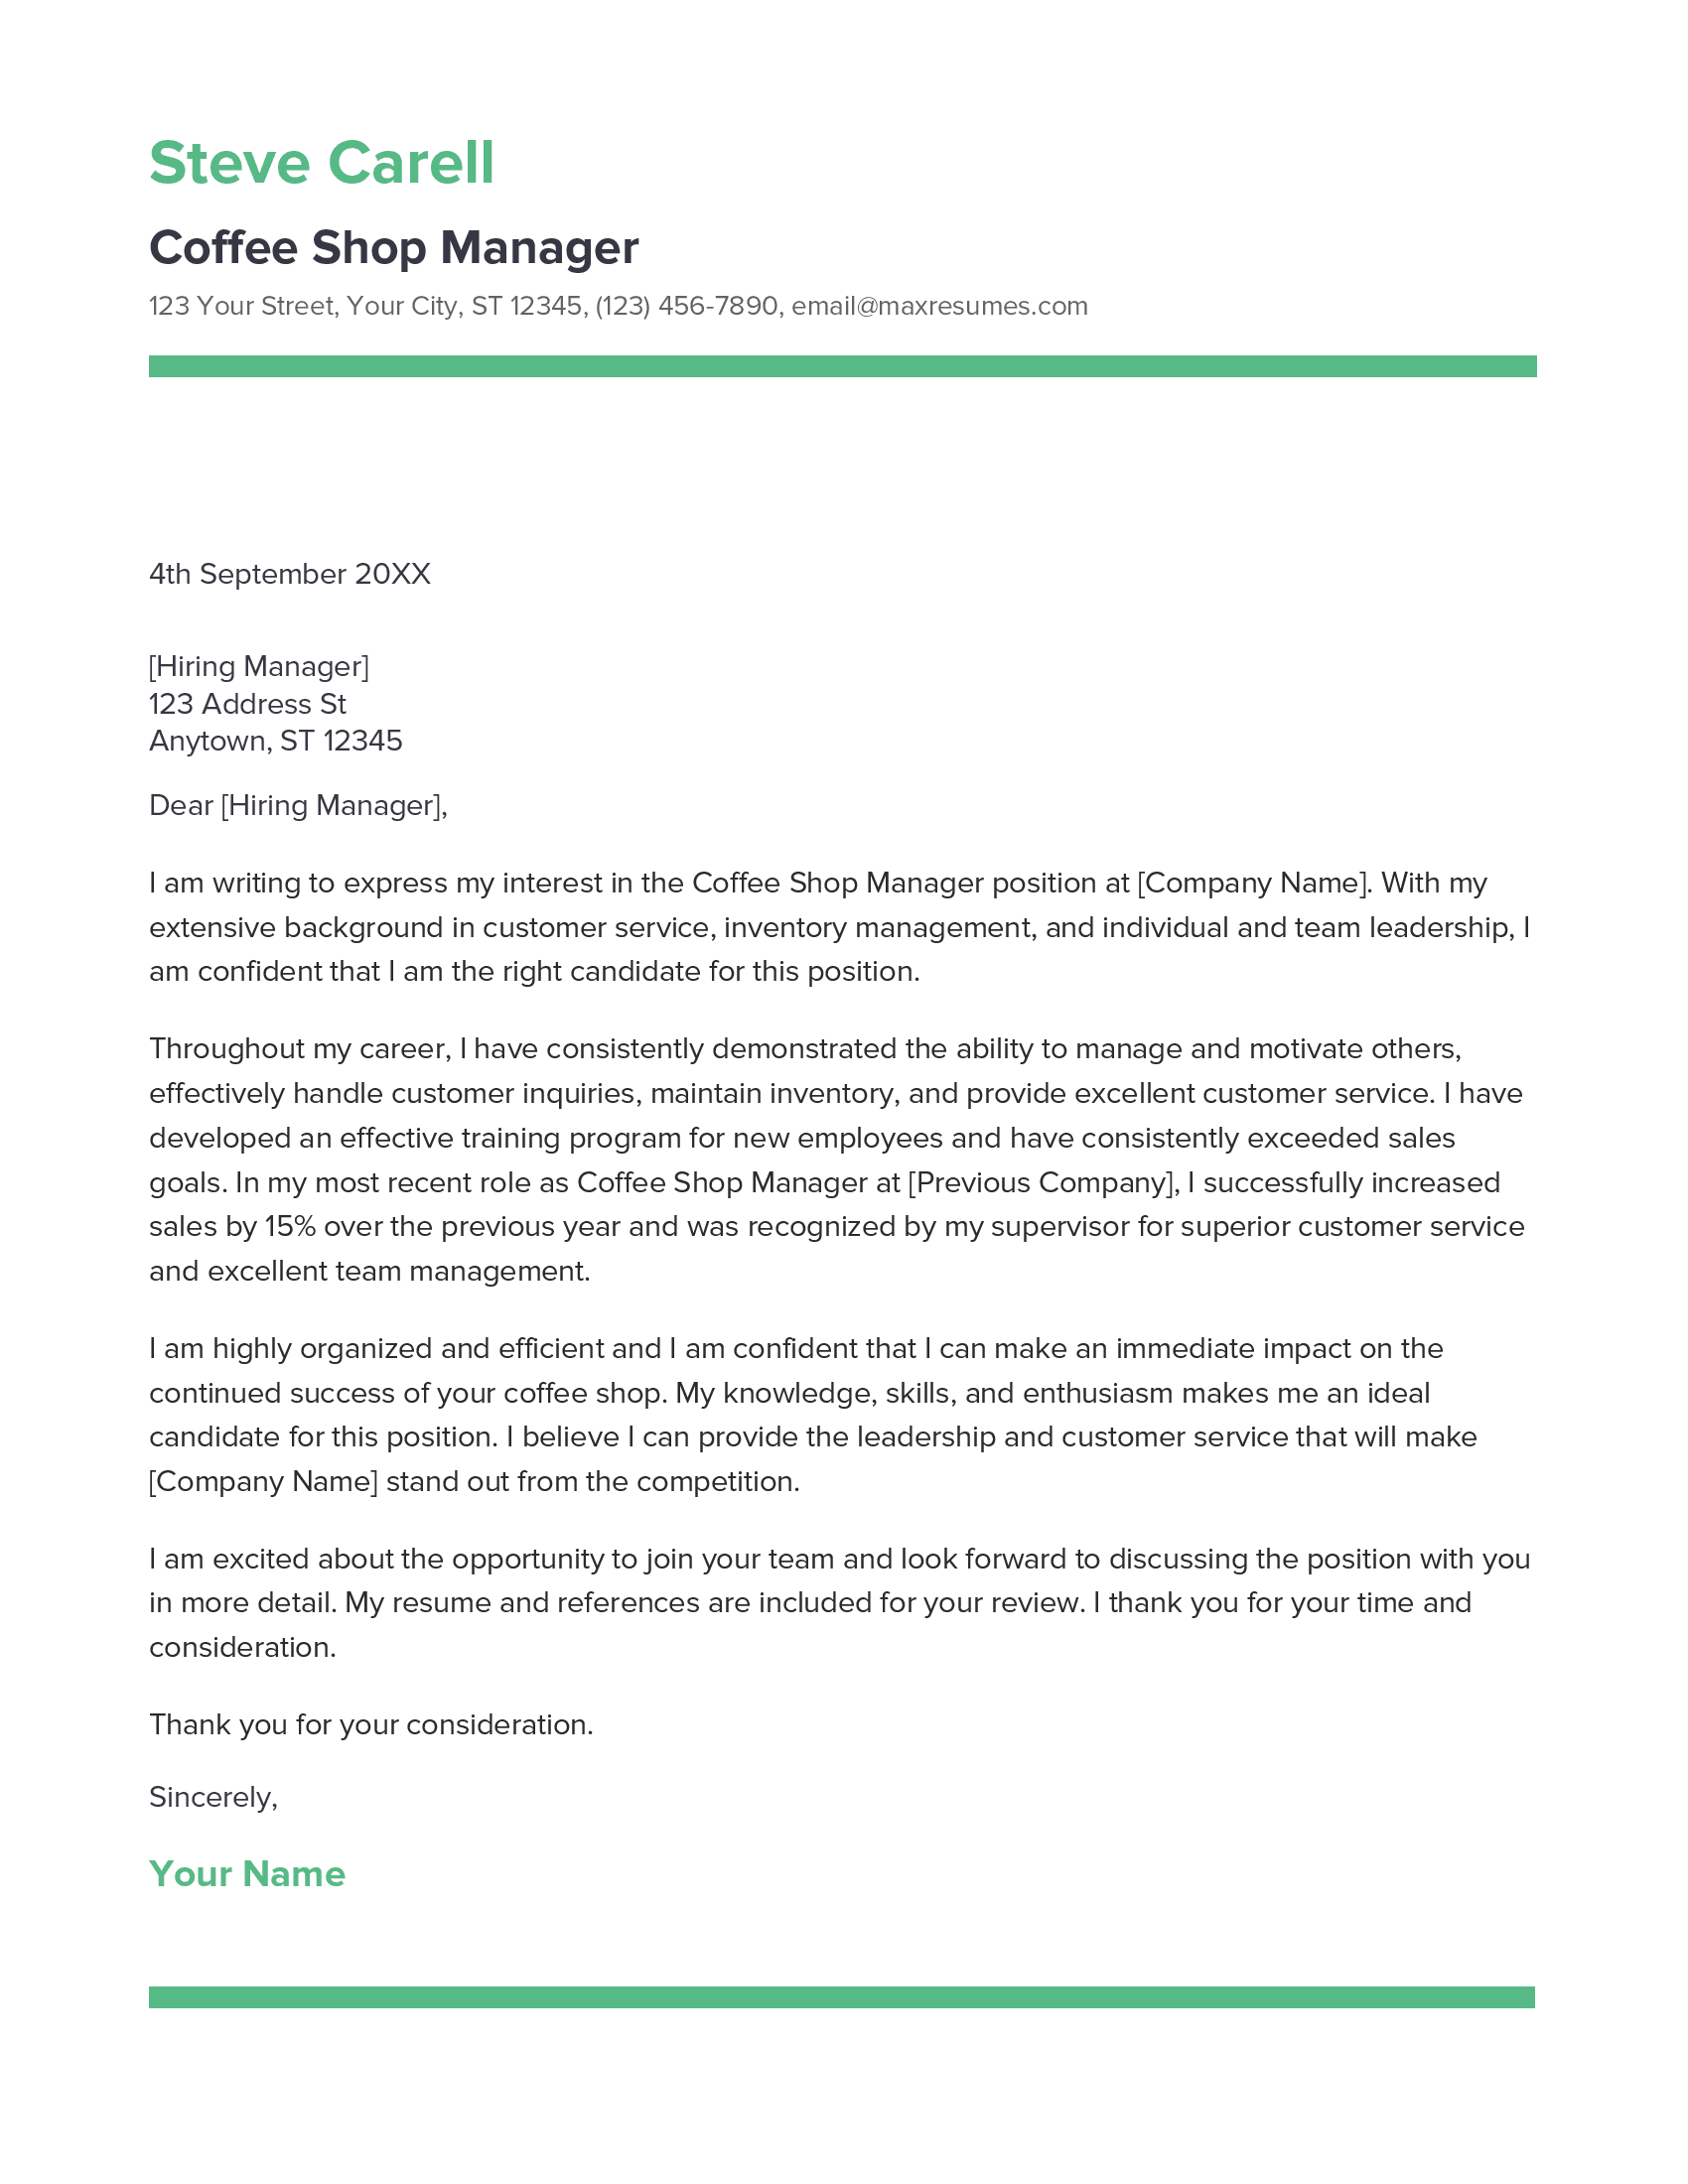 Coffee Shop Manager Cover Letter Example